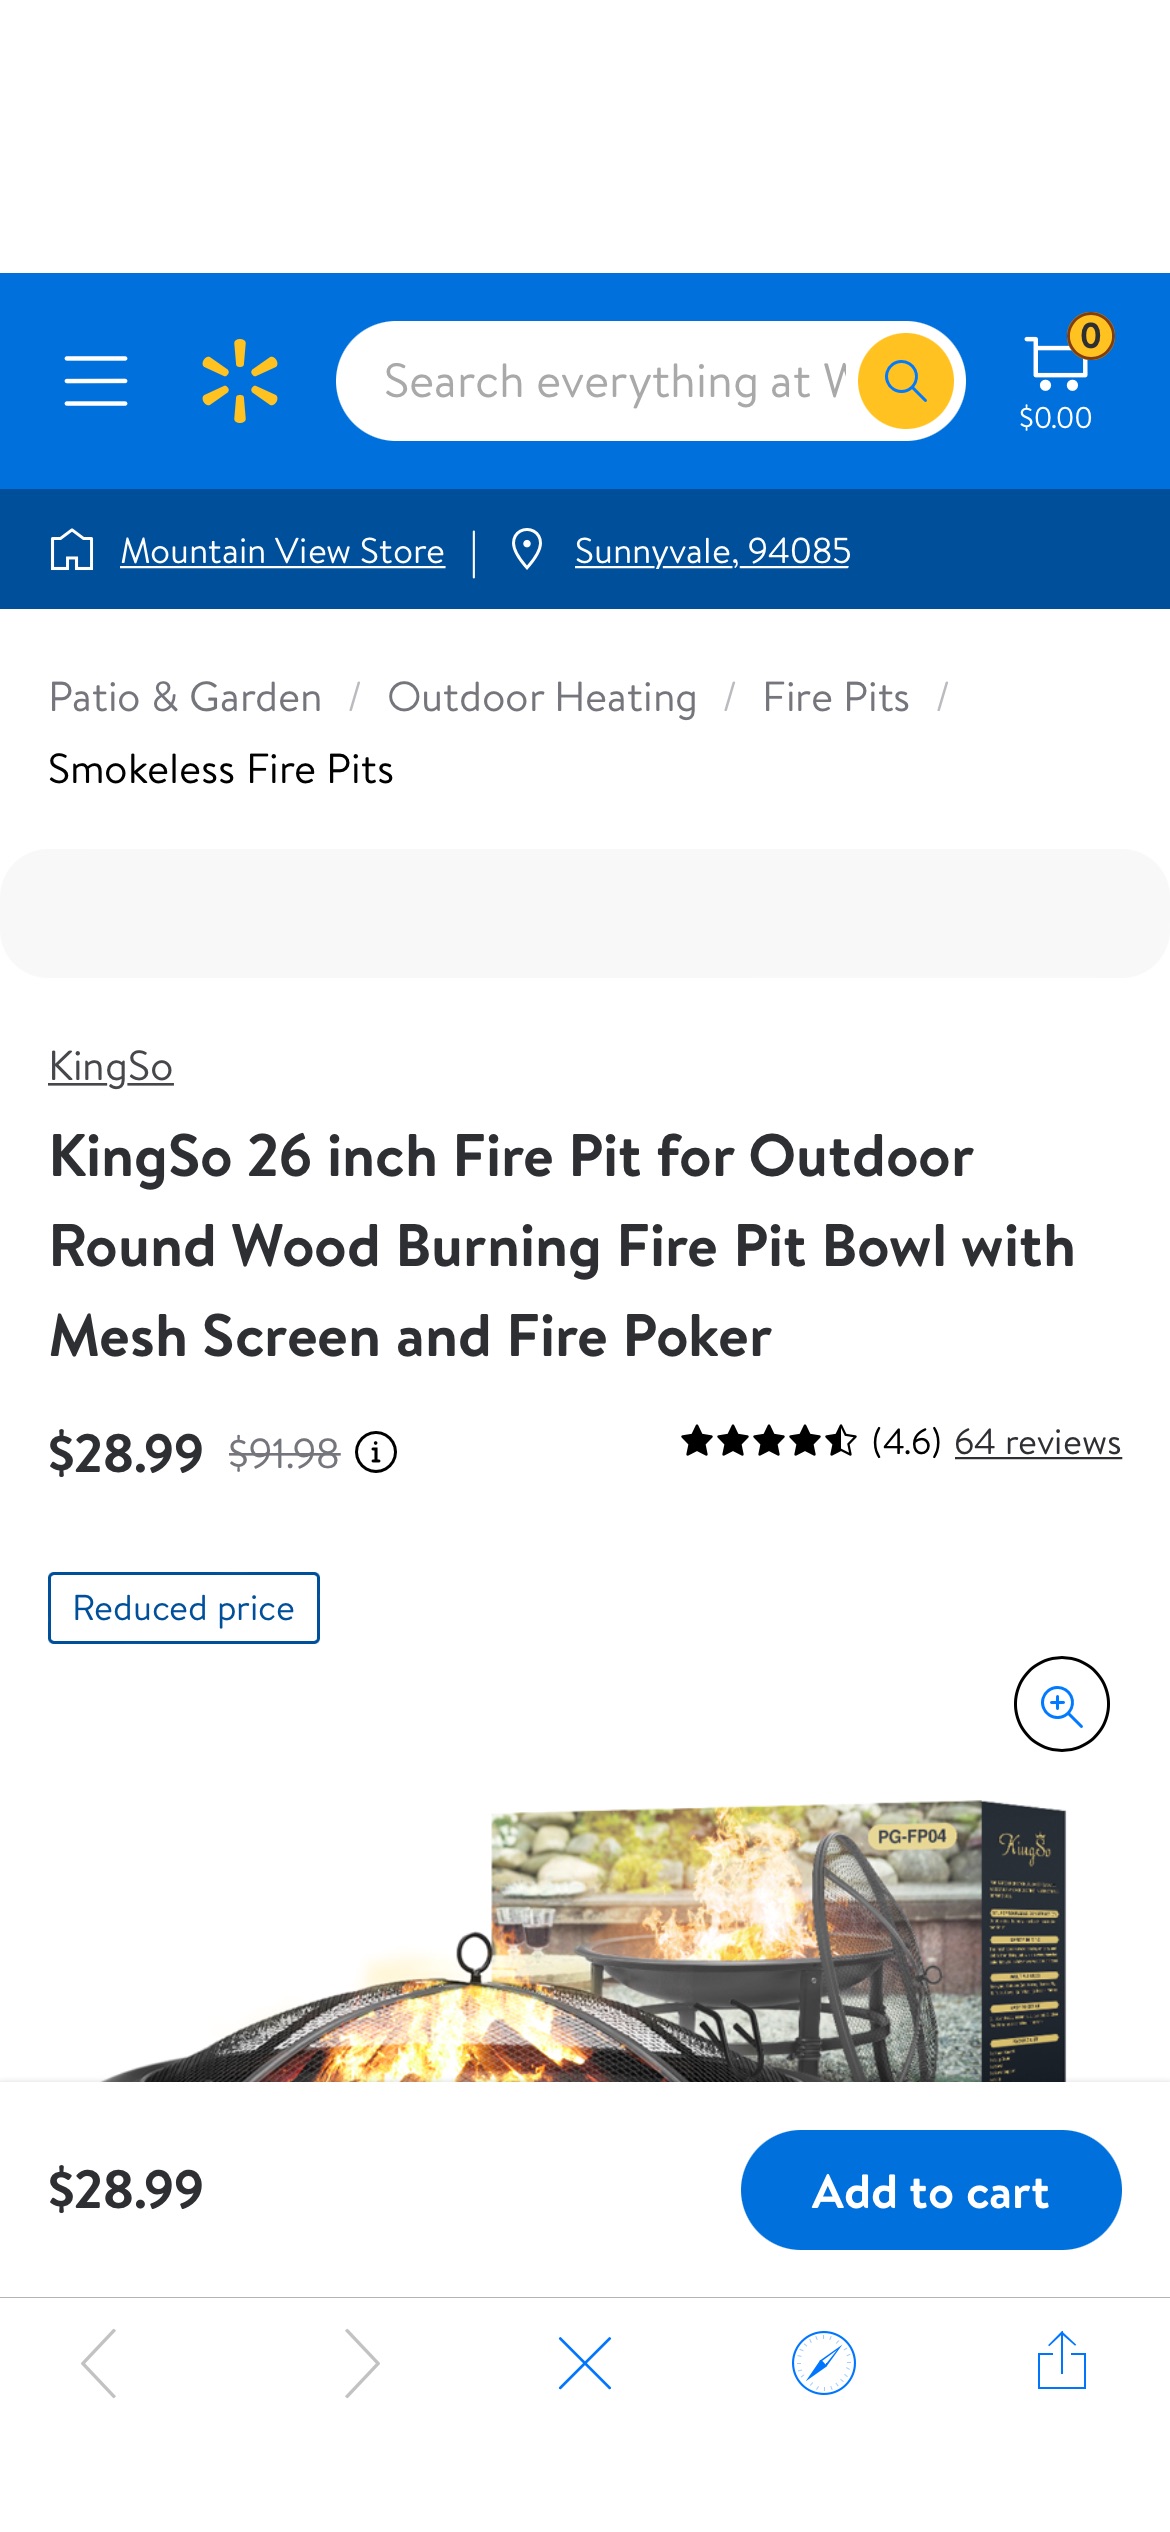 KingSo 26 inch Fire Pit for Outdoor Round Wood Burning啊 Fire Pit Bowl with Mesh Screen and Fire Poker - Walmart.com